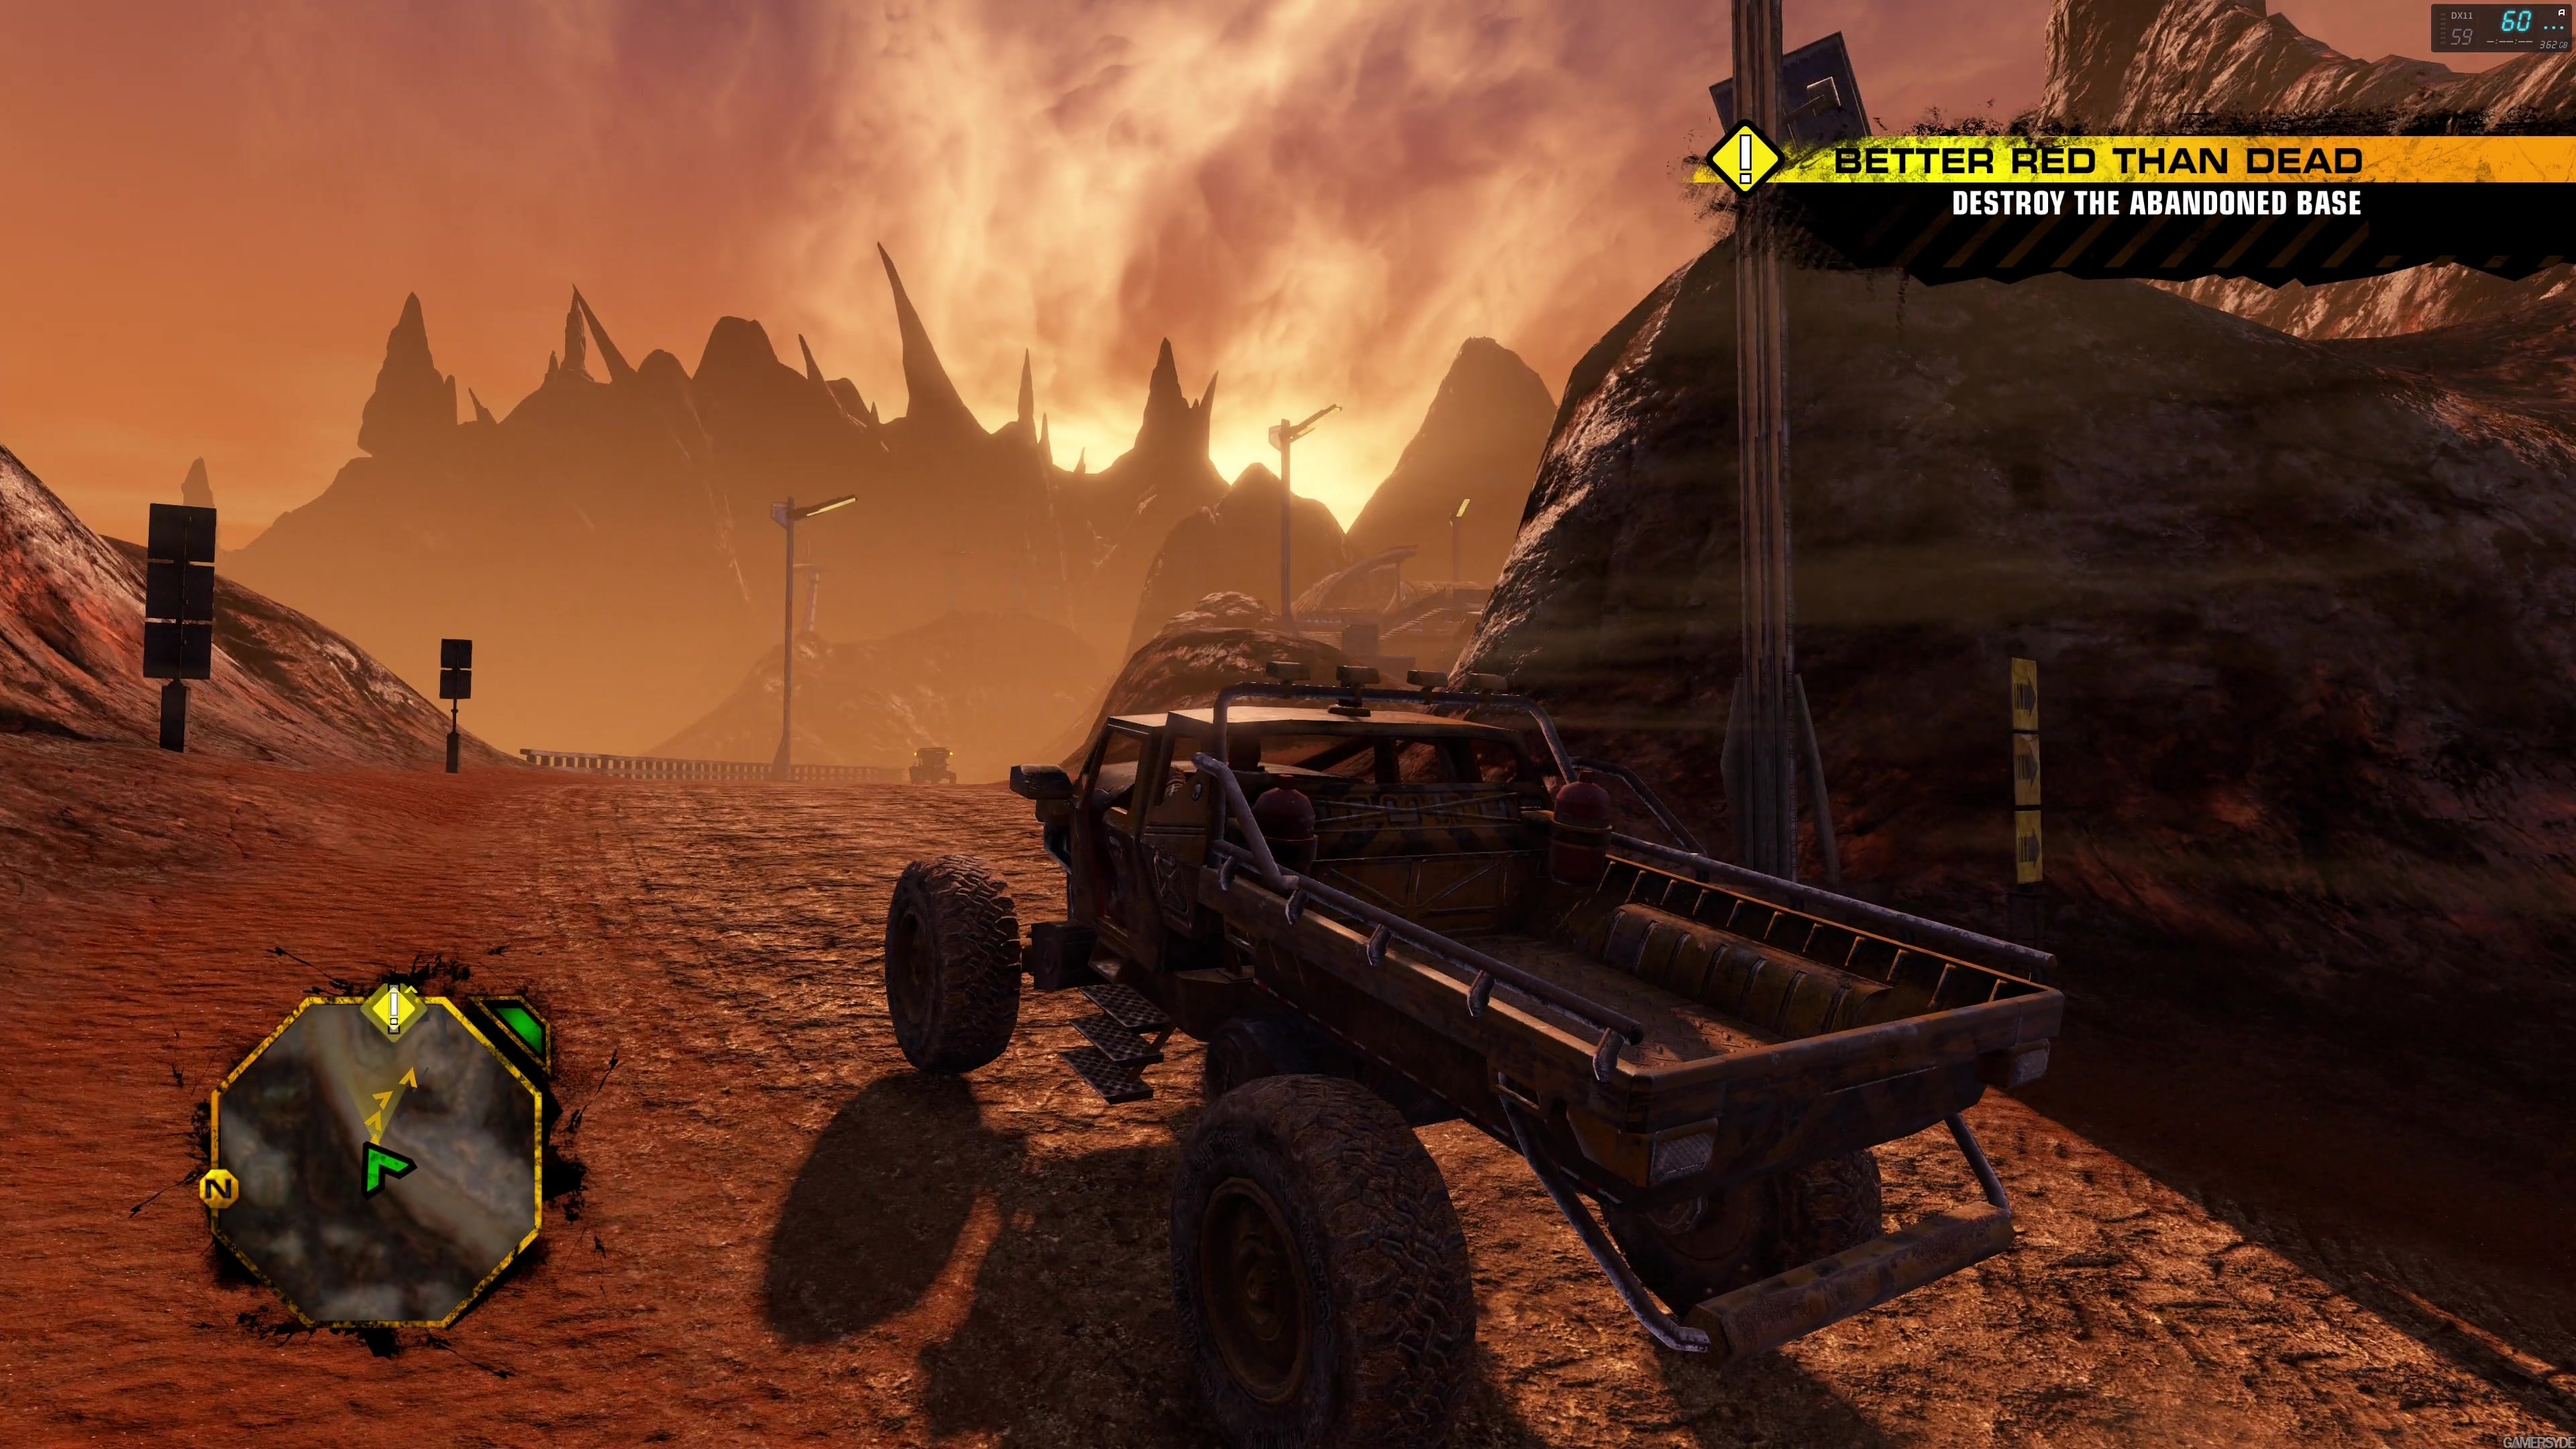 Red gameplay. Red Faction: Guerrilla геймплей. Red Faction Guerrilla re-Mars-tered геймплей. Red Faction 2001. Red Faction 3 Guerrilla.